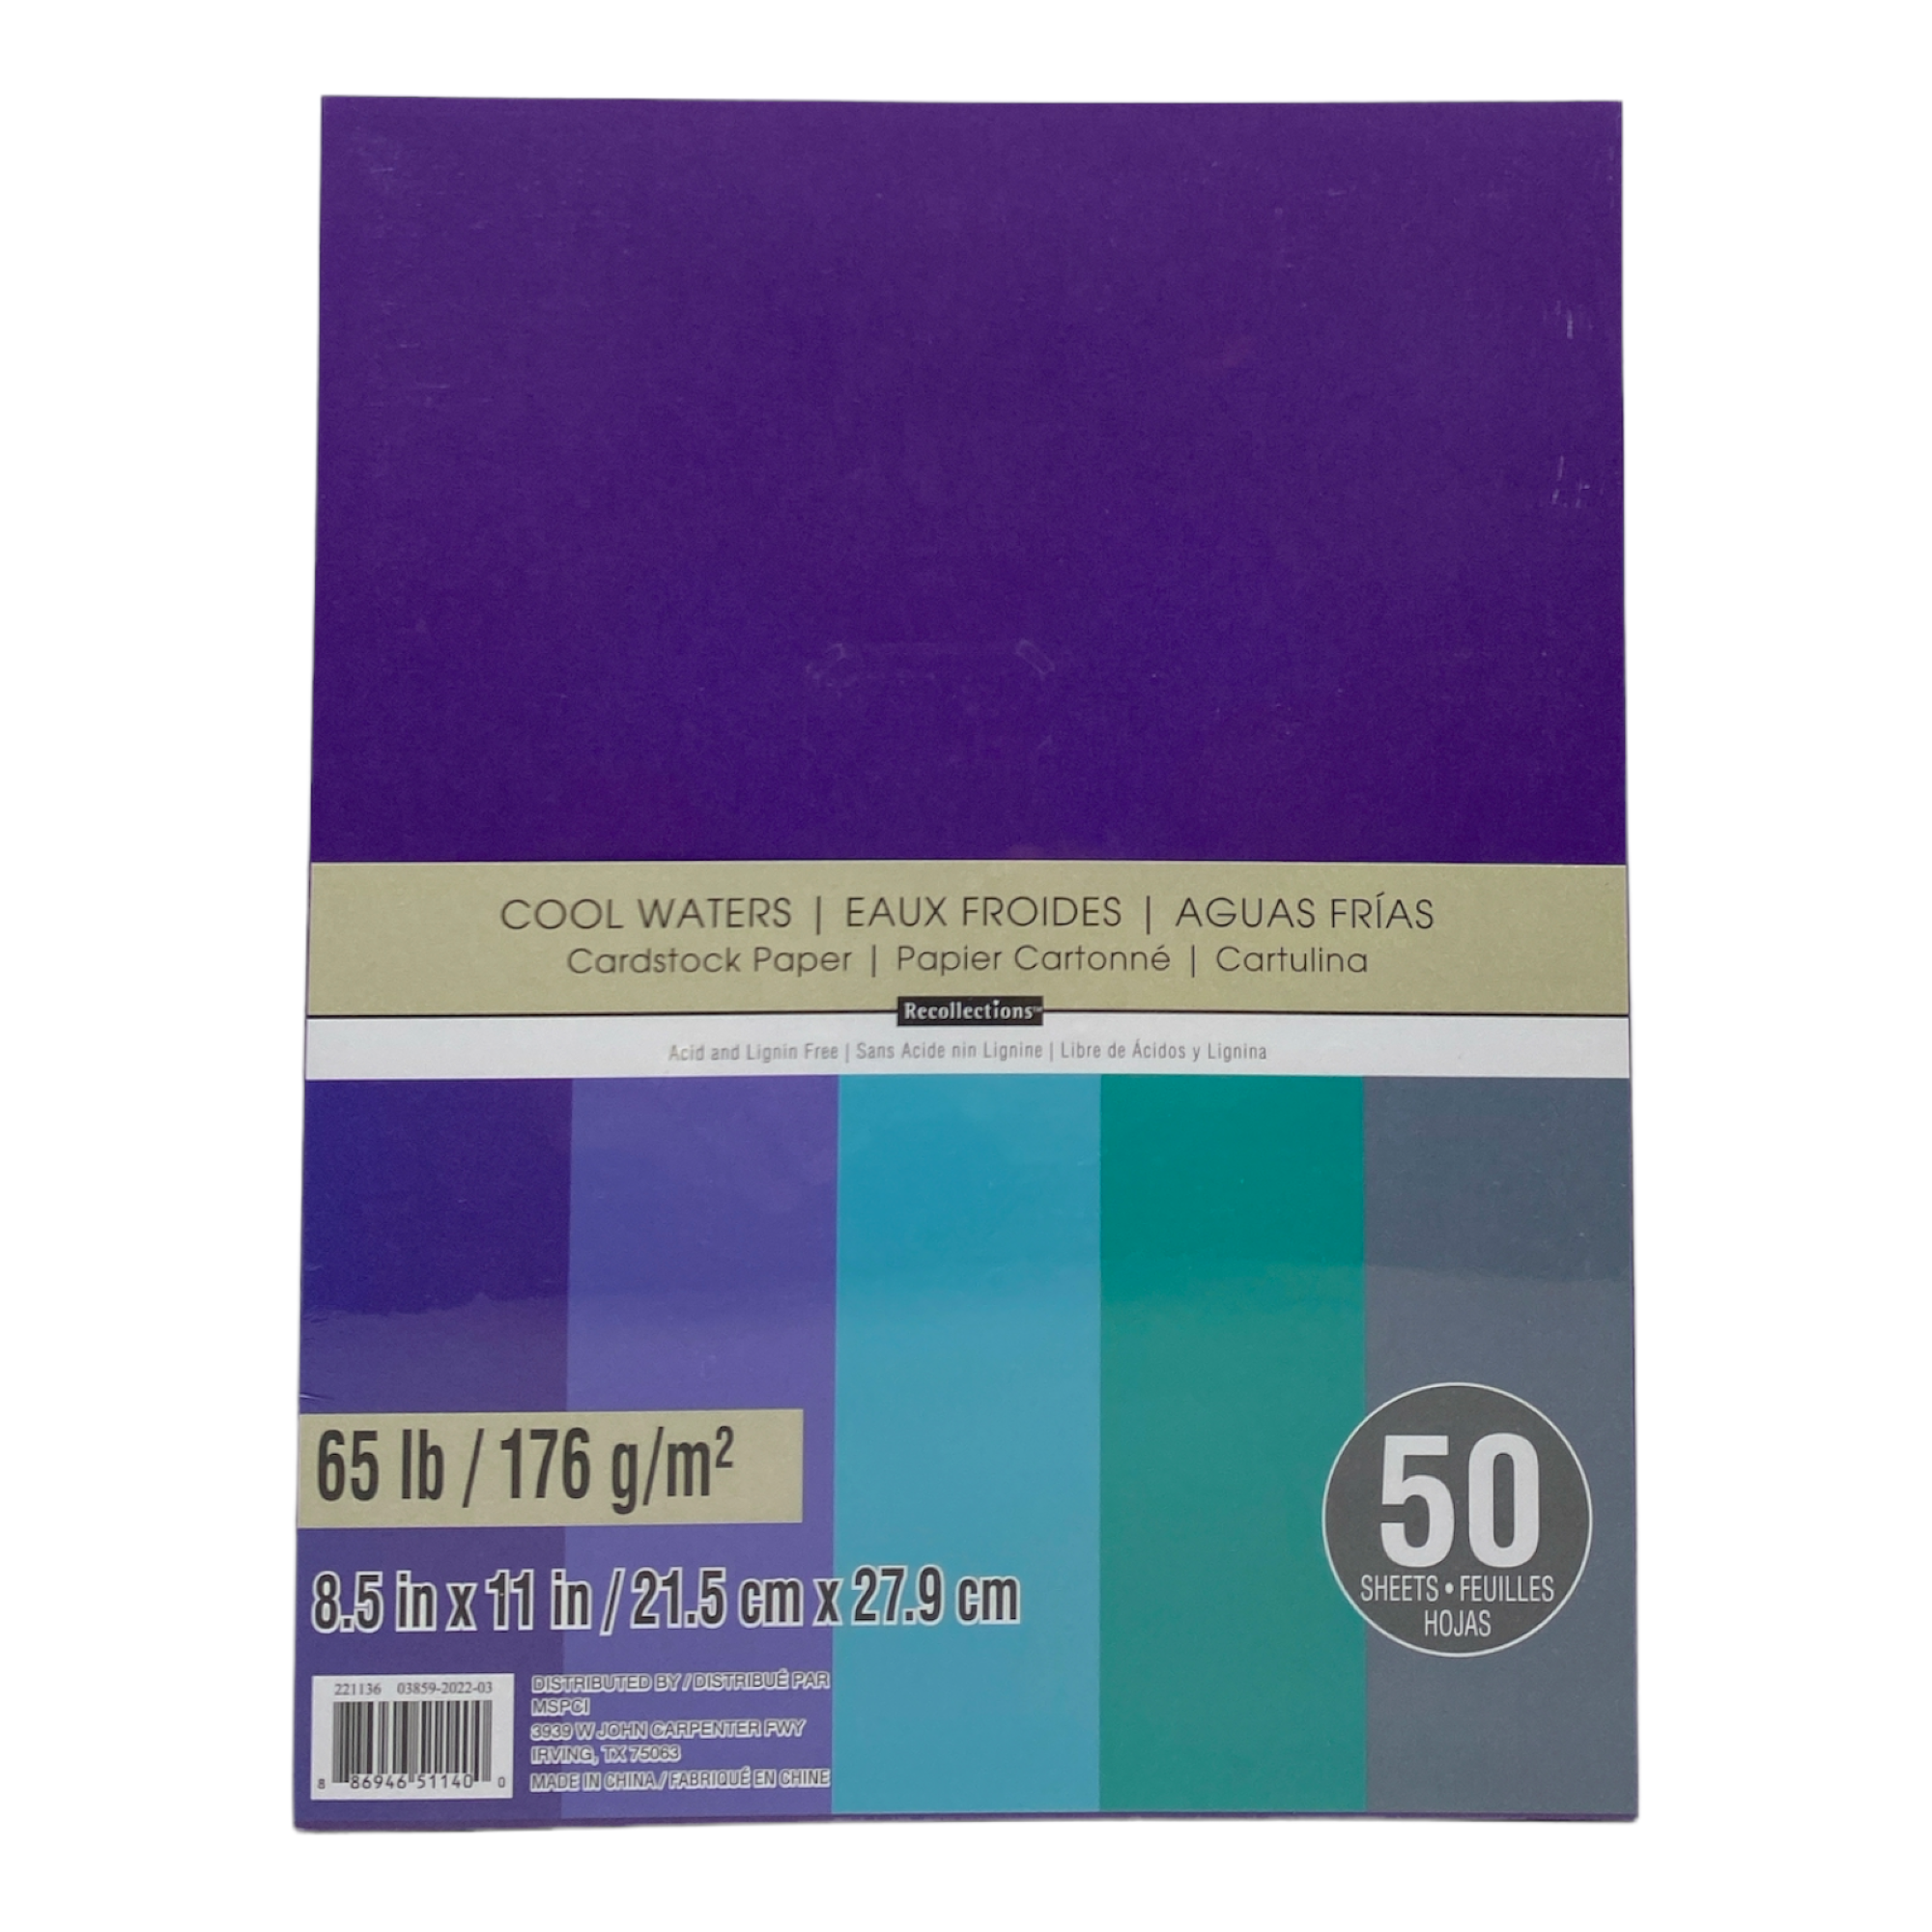 RECOLLECTIONS CardStock Paper Assorted Colors.